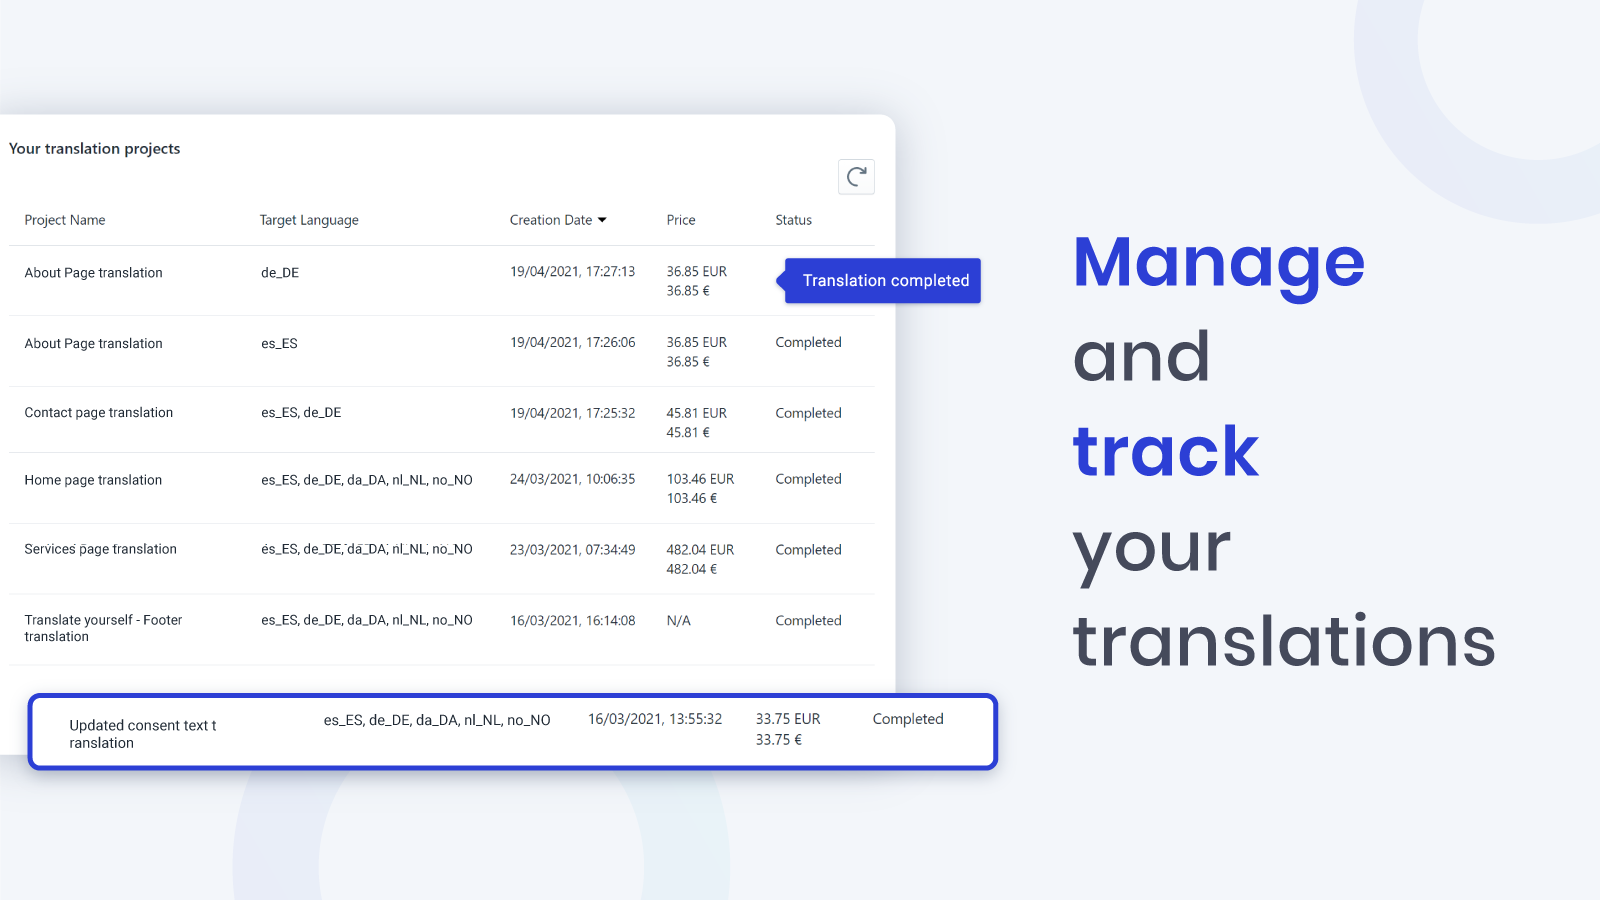 User interface - Manage your projects